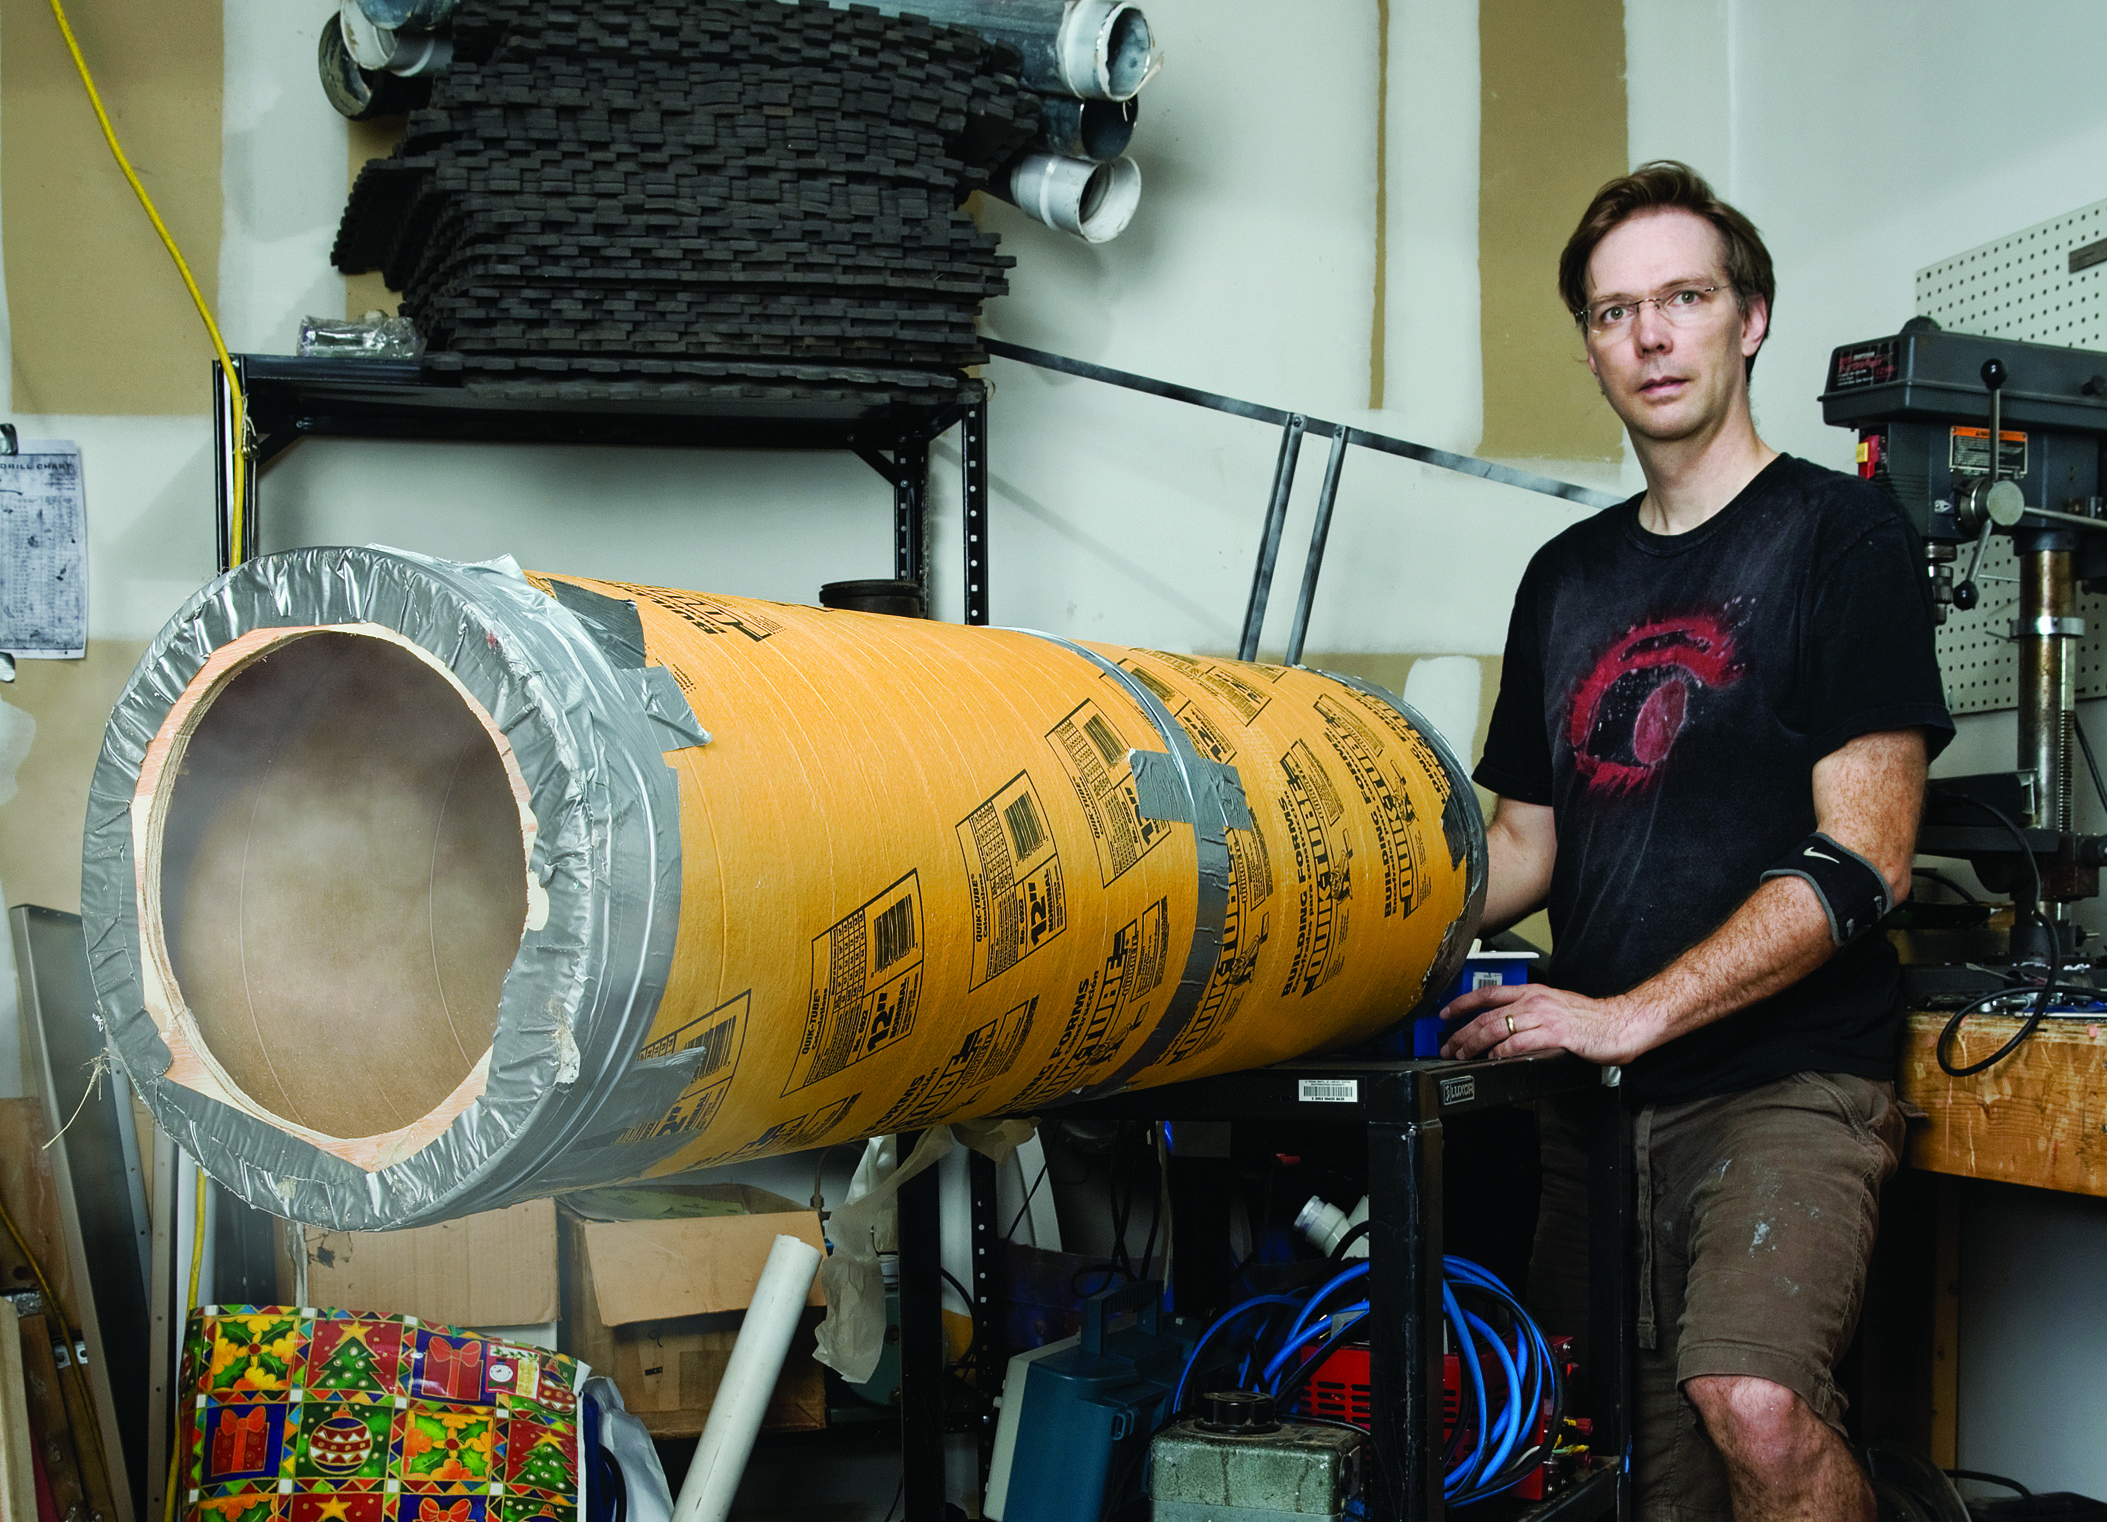 Build a Simple Vortex Cannon, Then Upgrade with a Subwoofer